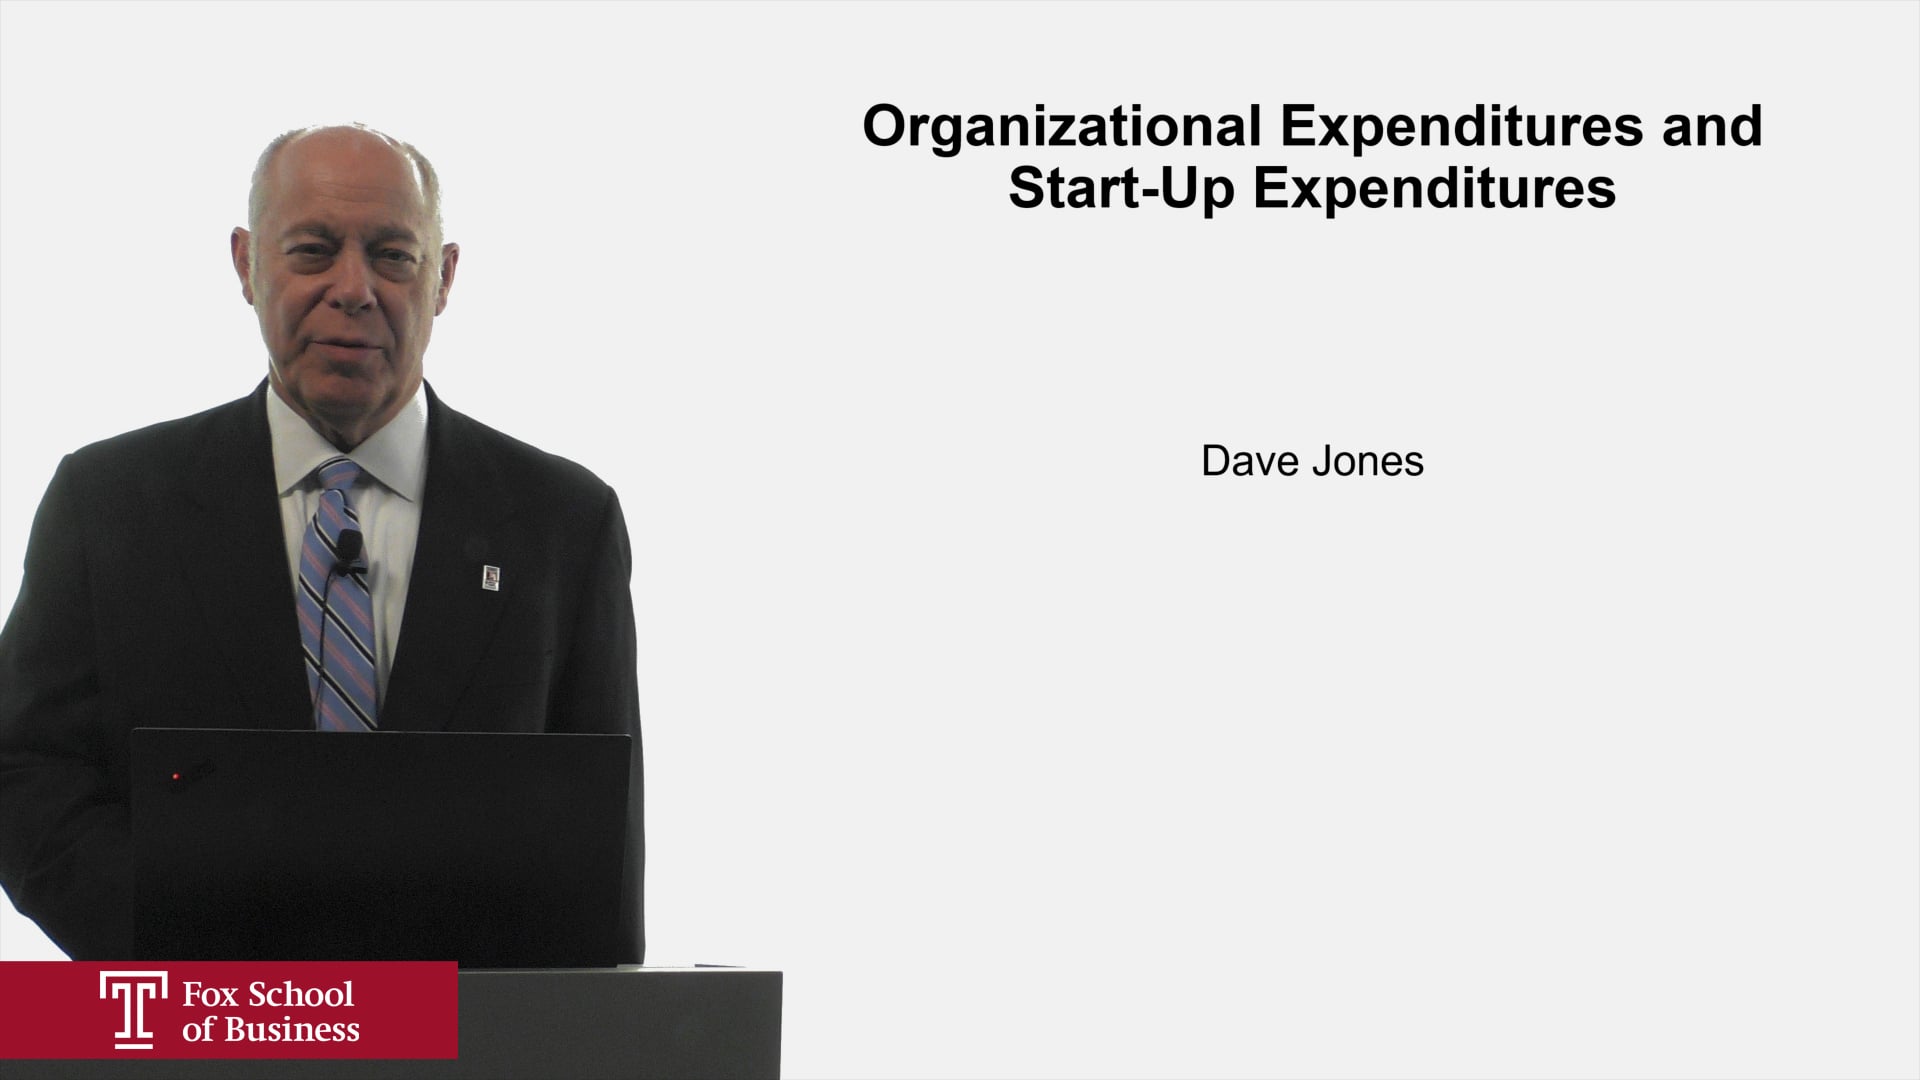 Organizational Expenditures and Start-Up Expenditures